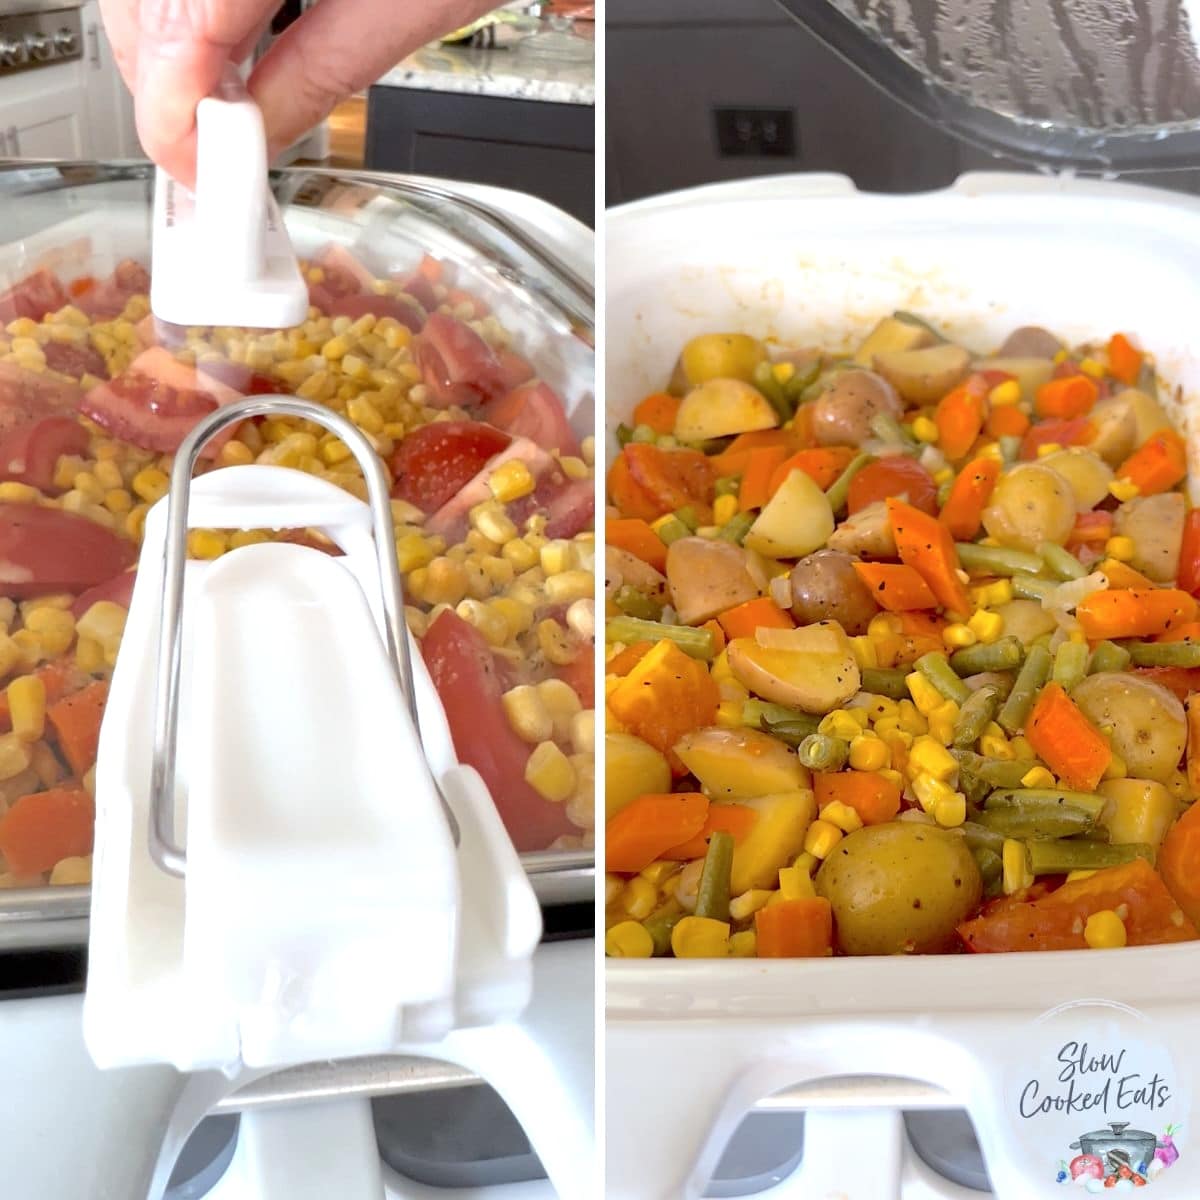 Placing the lid on the slow cooker vegetables then cooking until tender.